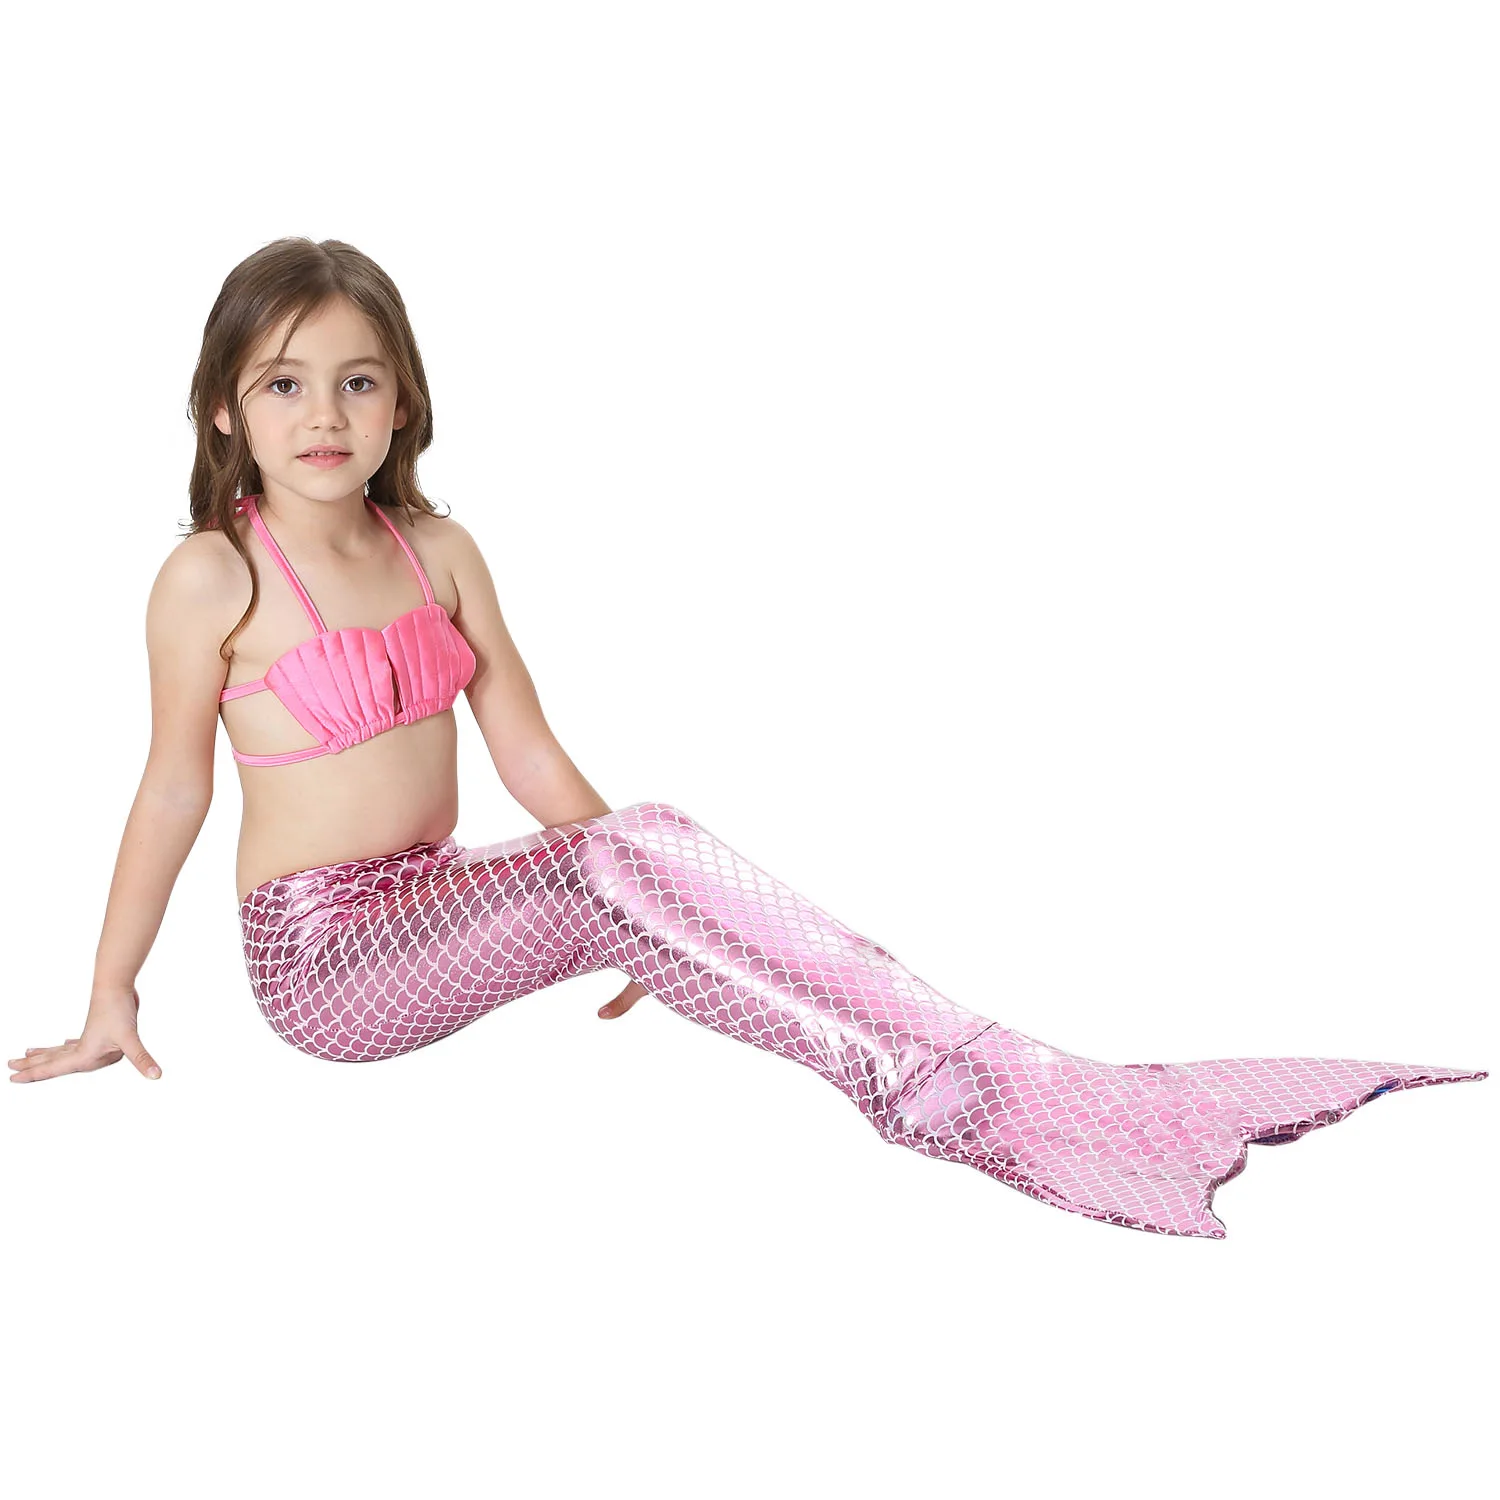 New Little Mermaid Tails for Girls Cosplay Suit Mermaid Tail Costume Girls Swimsuit Kids Children Swimming Dress french maid outfit